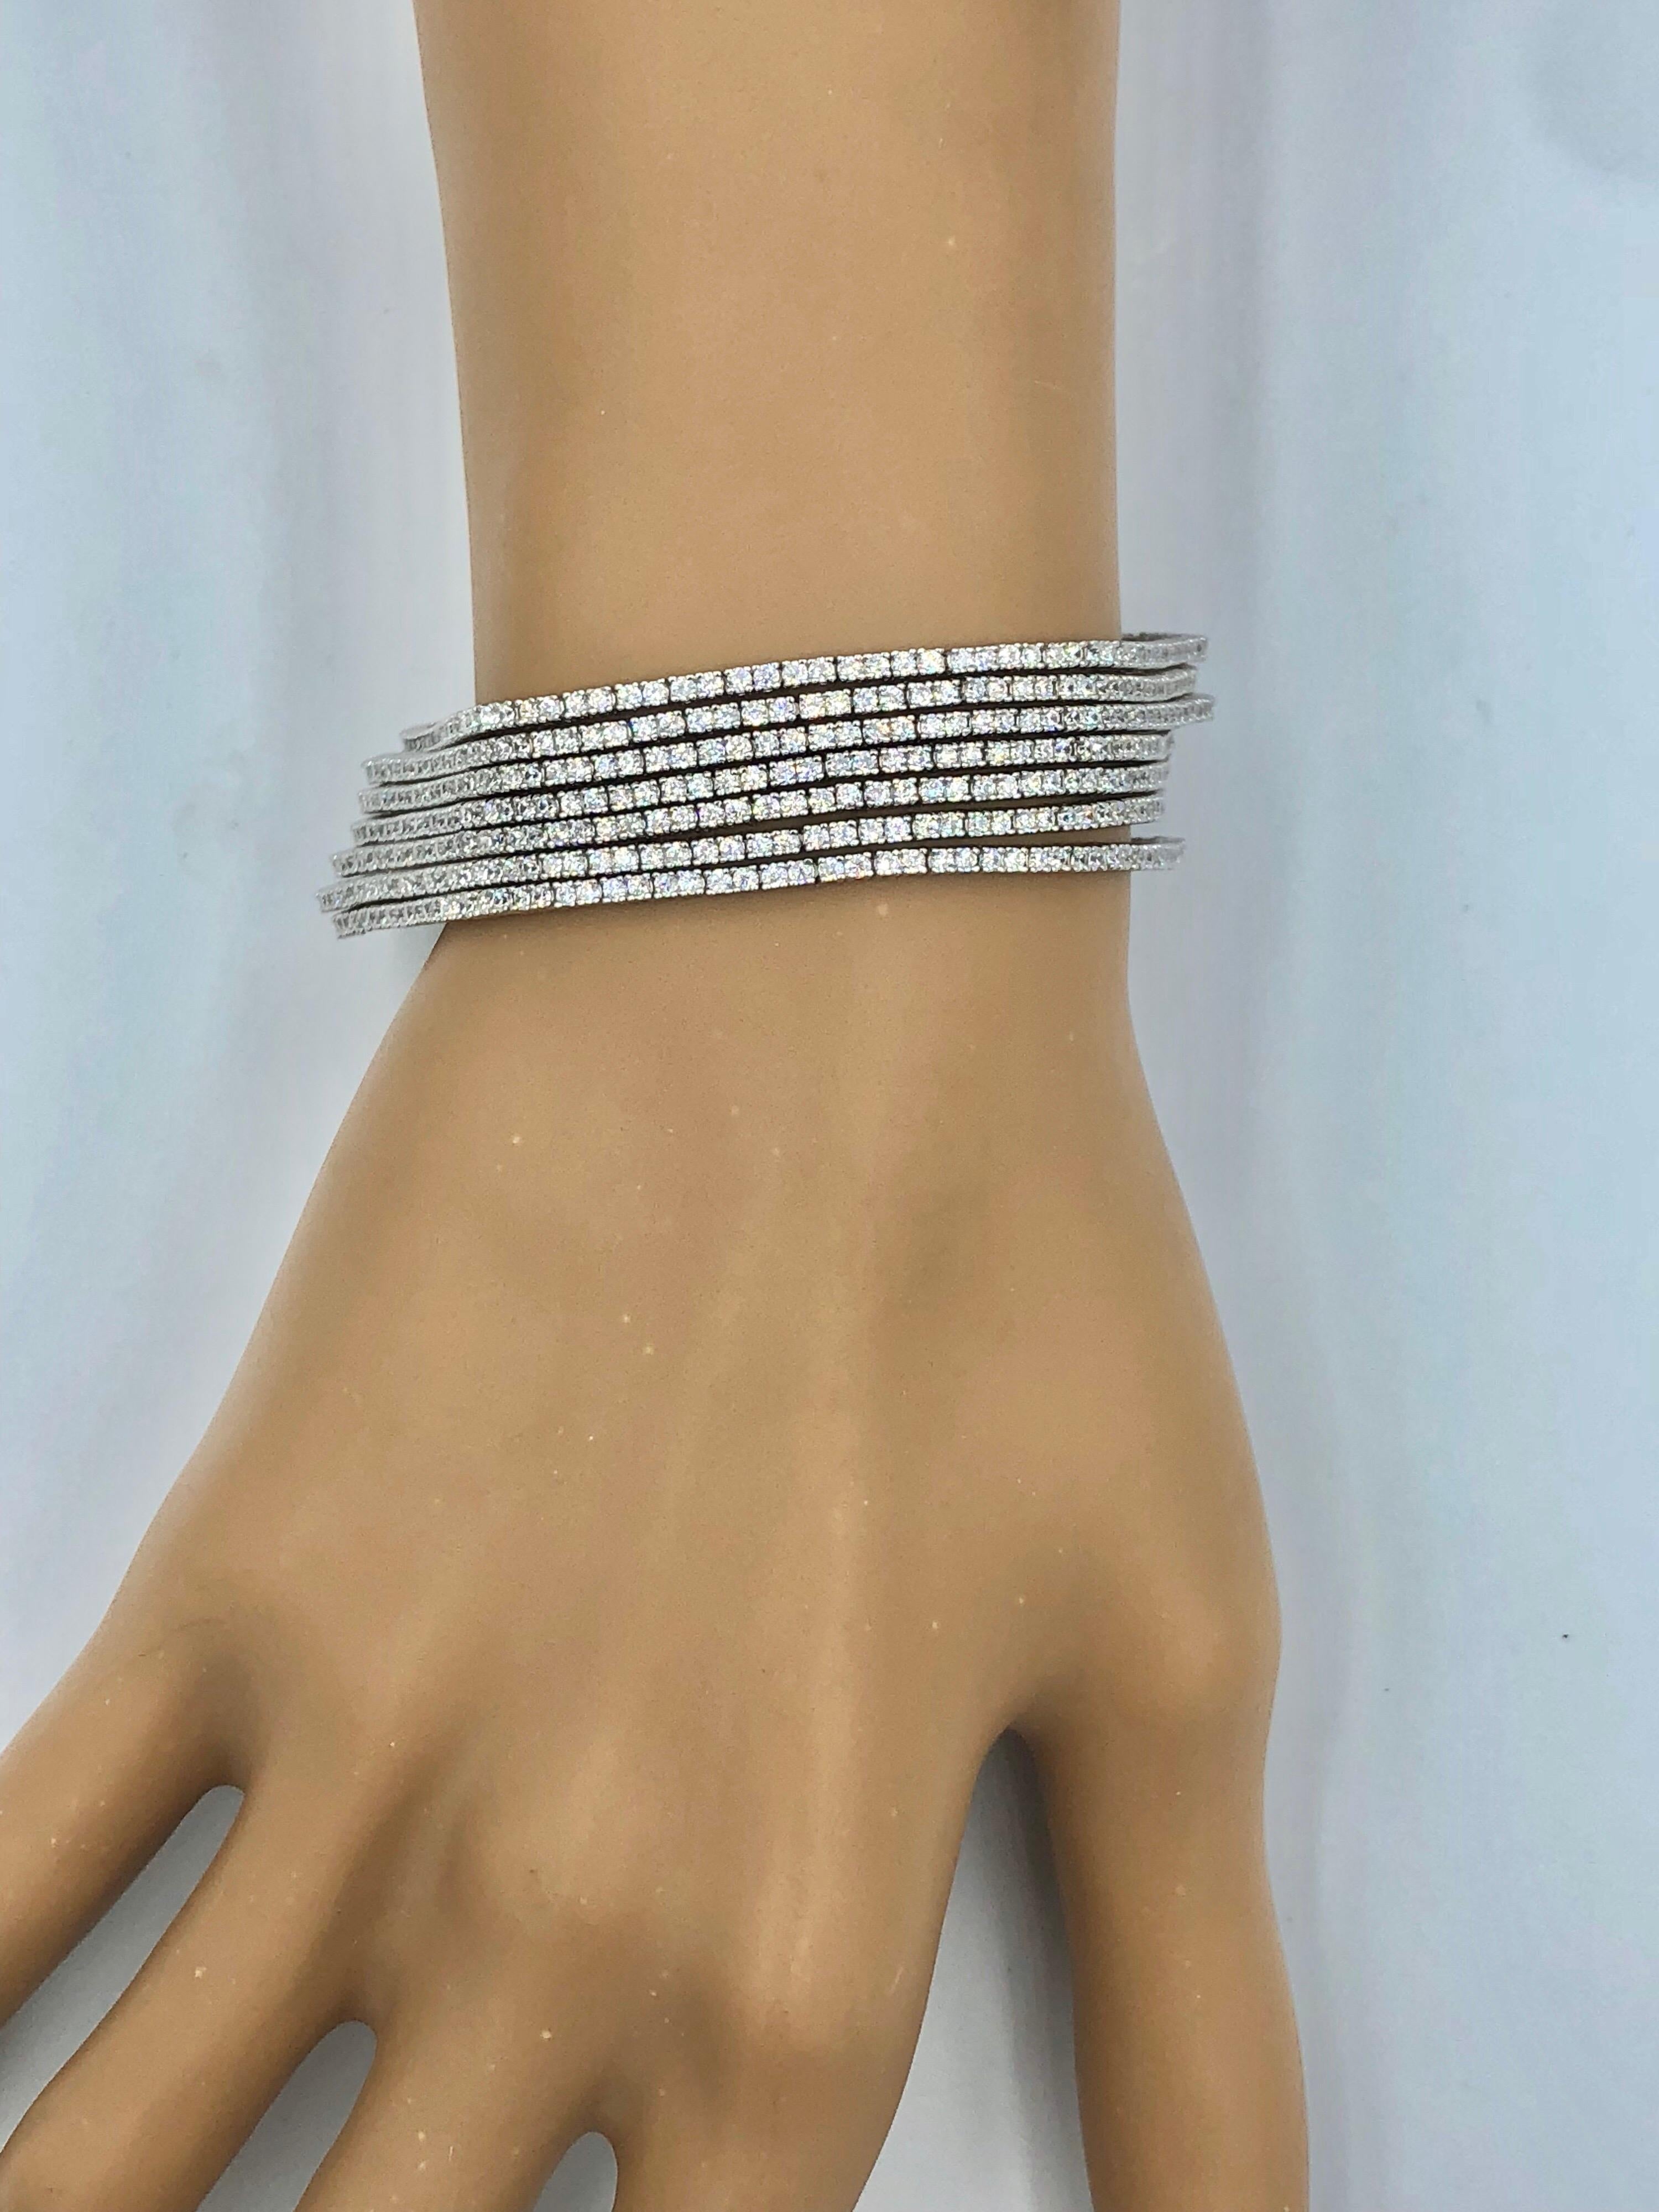 18k Gold Bracelet with Seven rows of diamonds that will cover your entire wrist with diamonds! 
7 inches long 
Available in all wrist lengths, and can be ordered in either yellow or rose gold. Approximately 623 diamonds totaling approximately 9.50